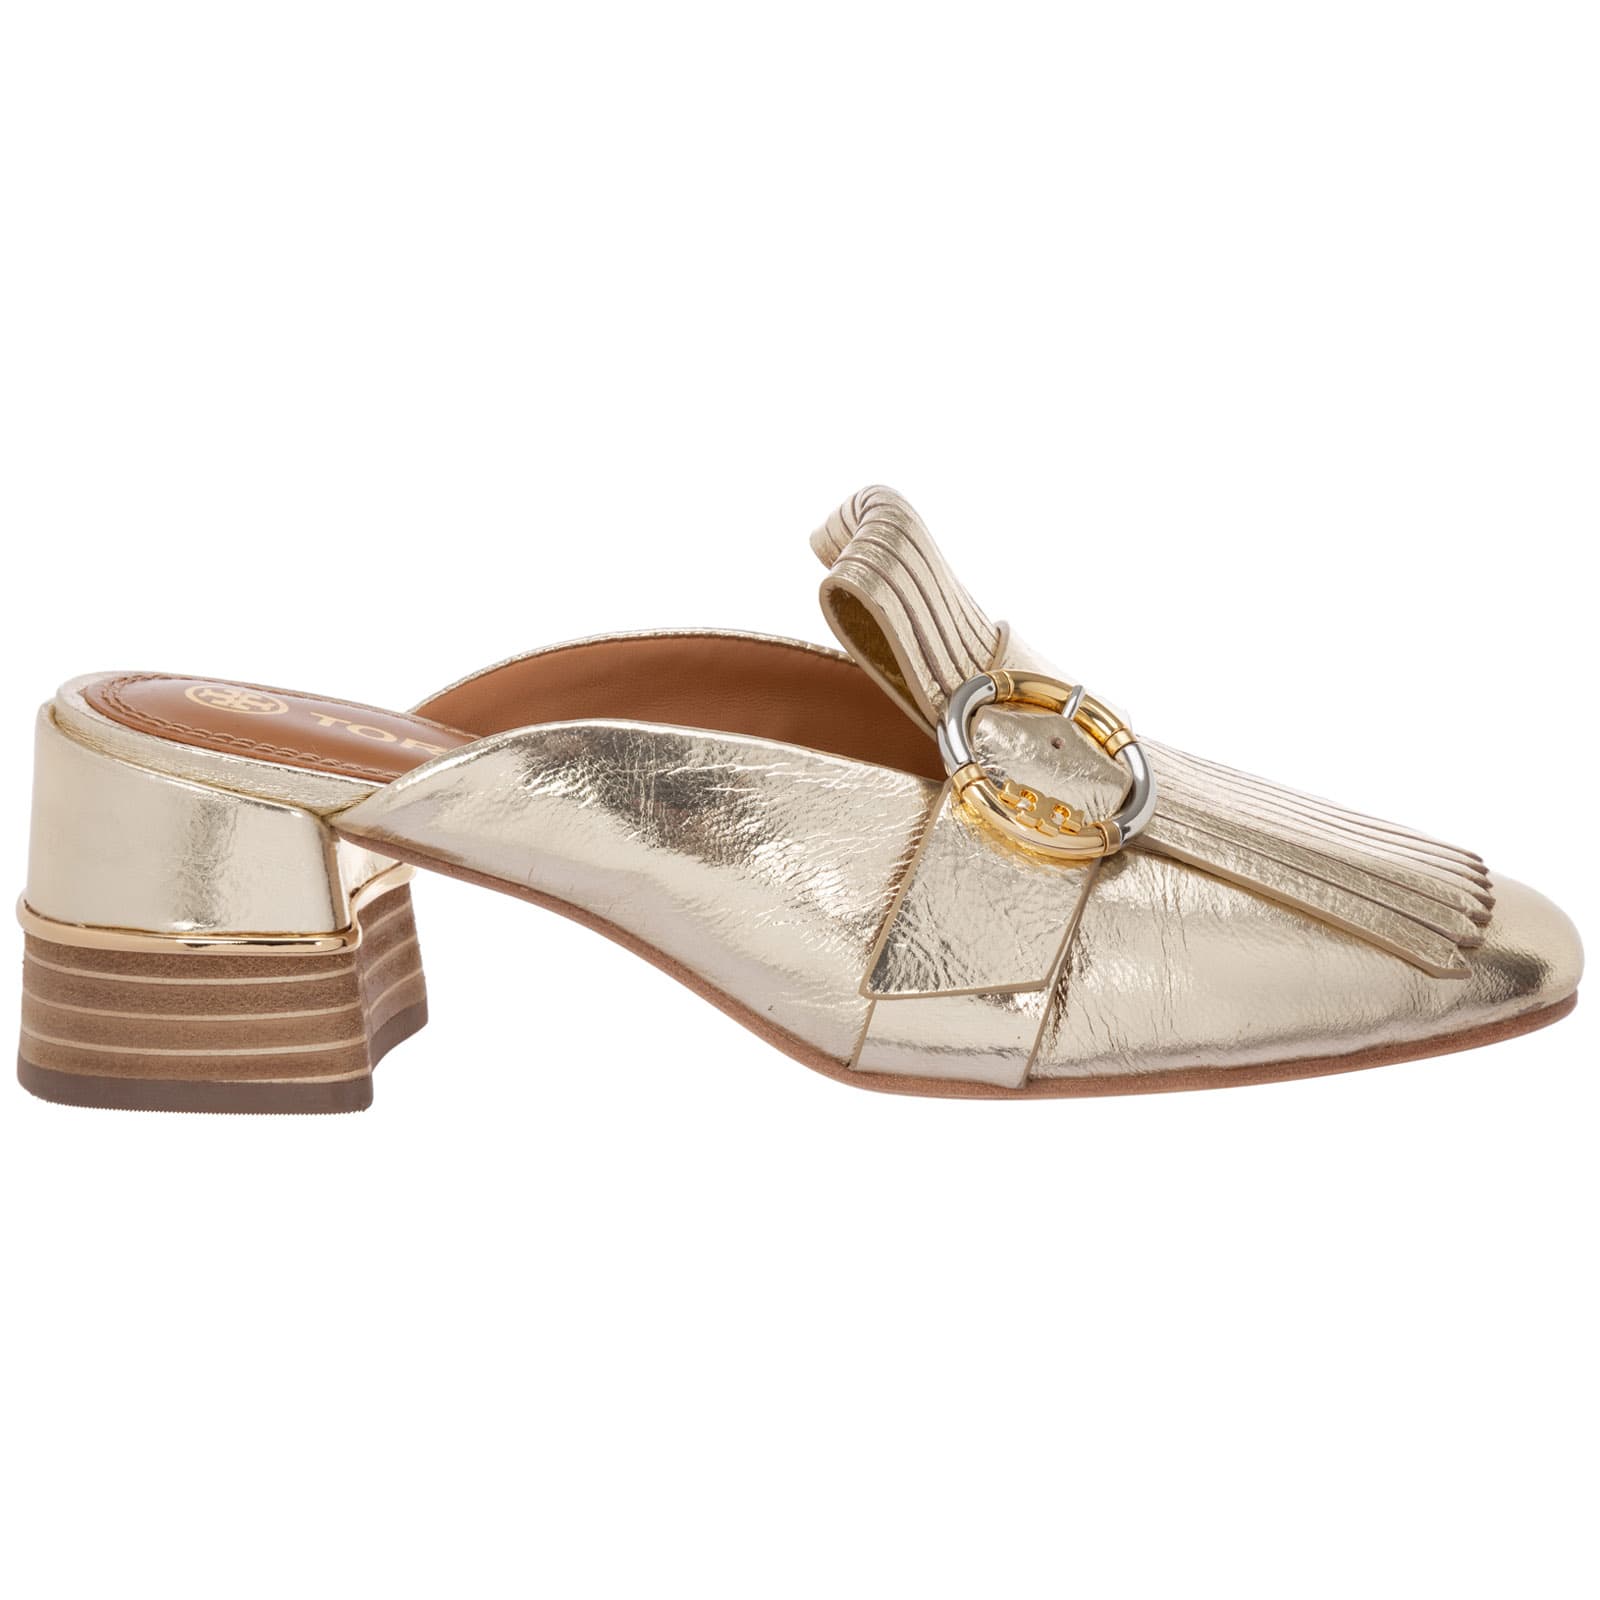 Tory Burch Horseferry Mules Shoes